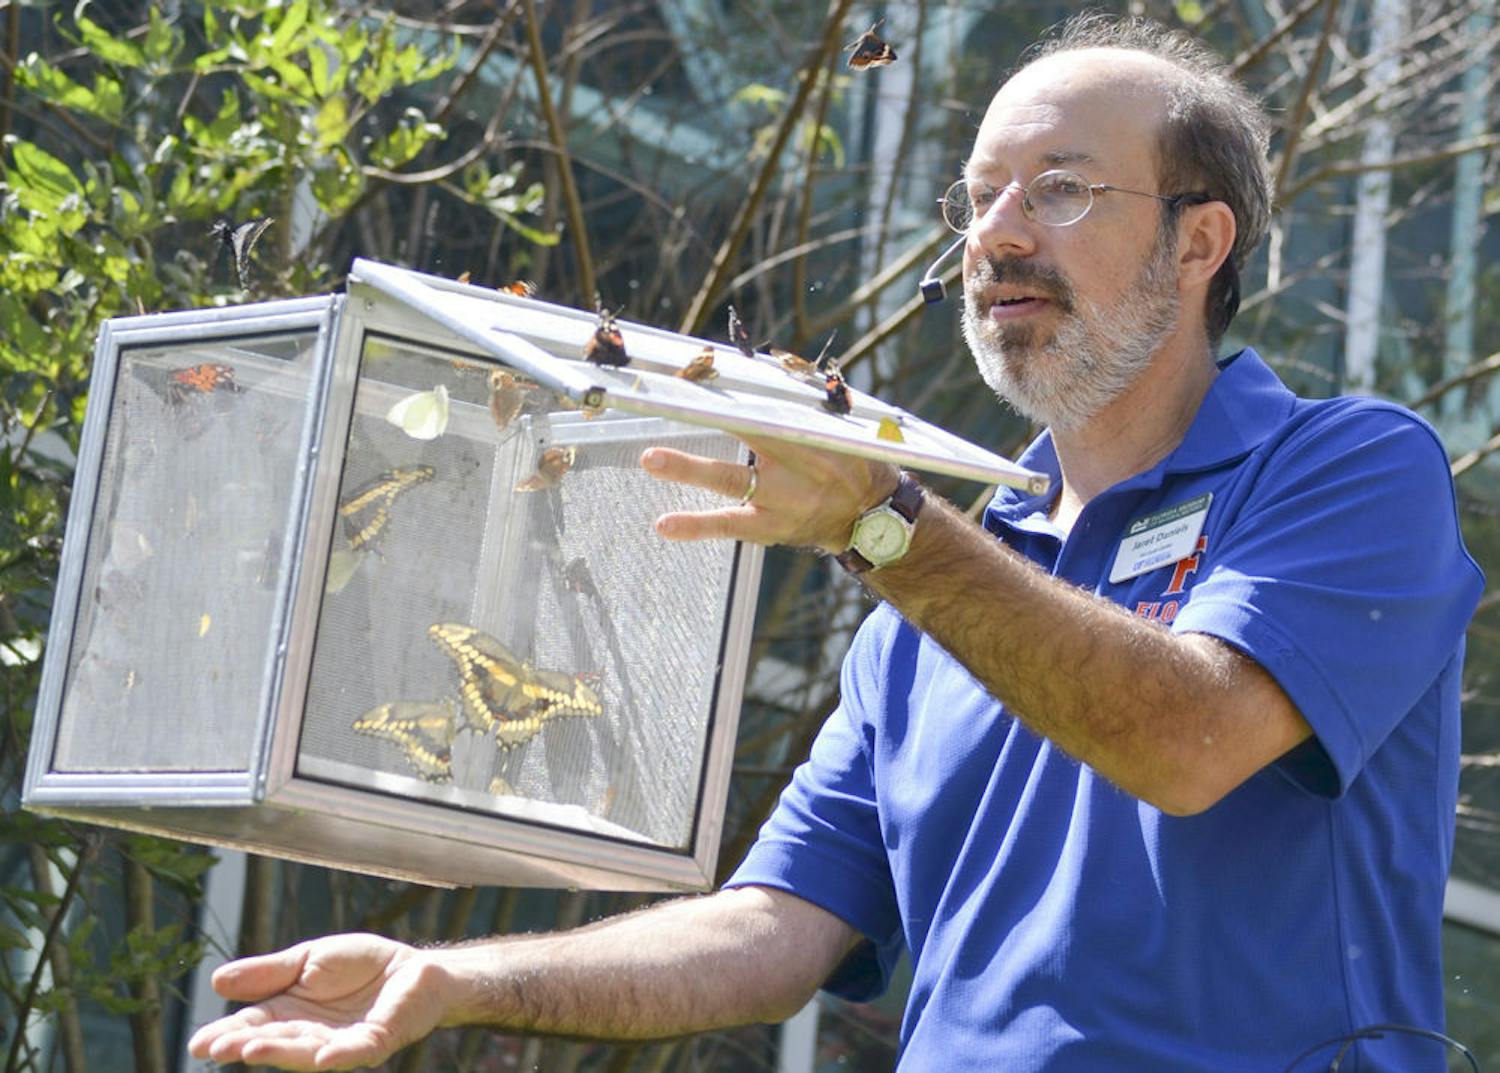 Jaret C. Daniels, a curator at the McGuire Center for Lepidoptera and Biodiversity, released native Florida butterflies during Saturday’s ButterflyFest event at the Florida Museum of Natural History.